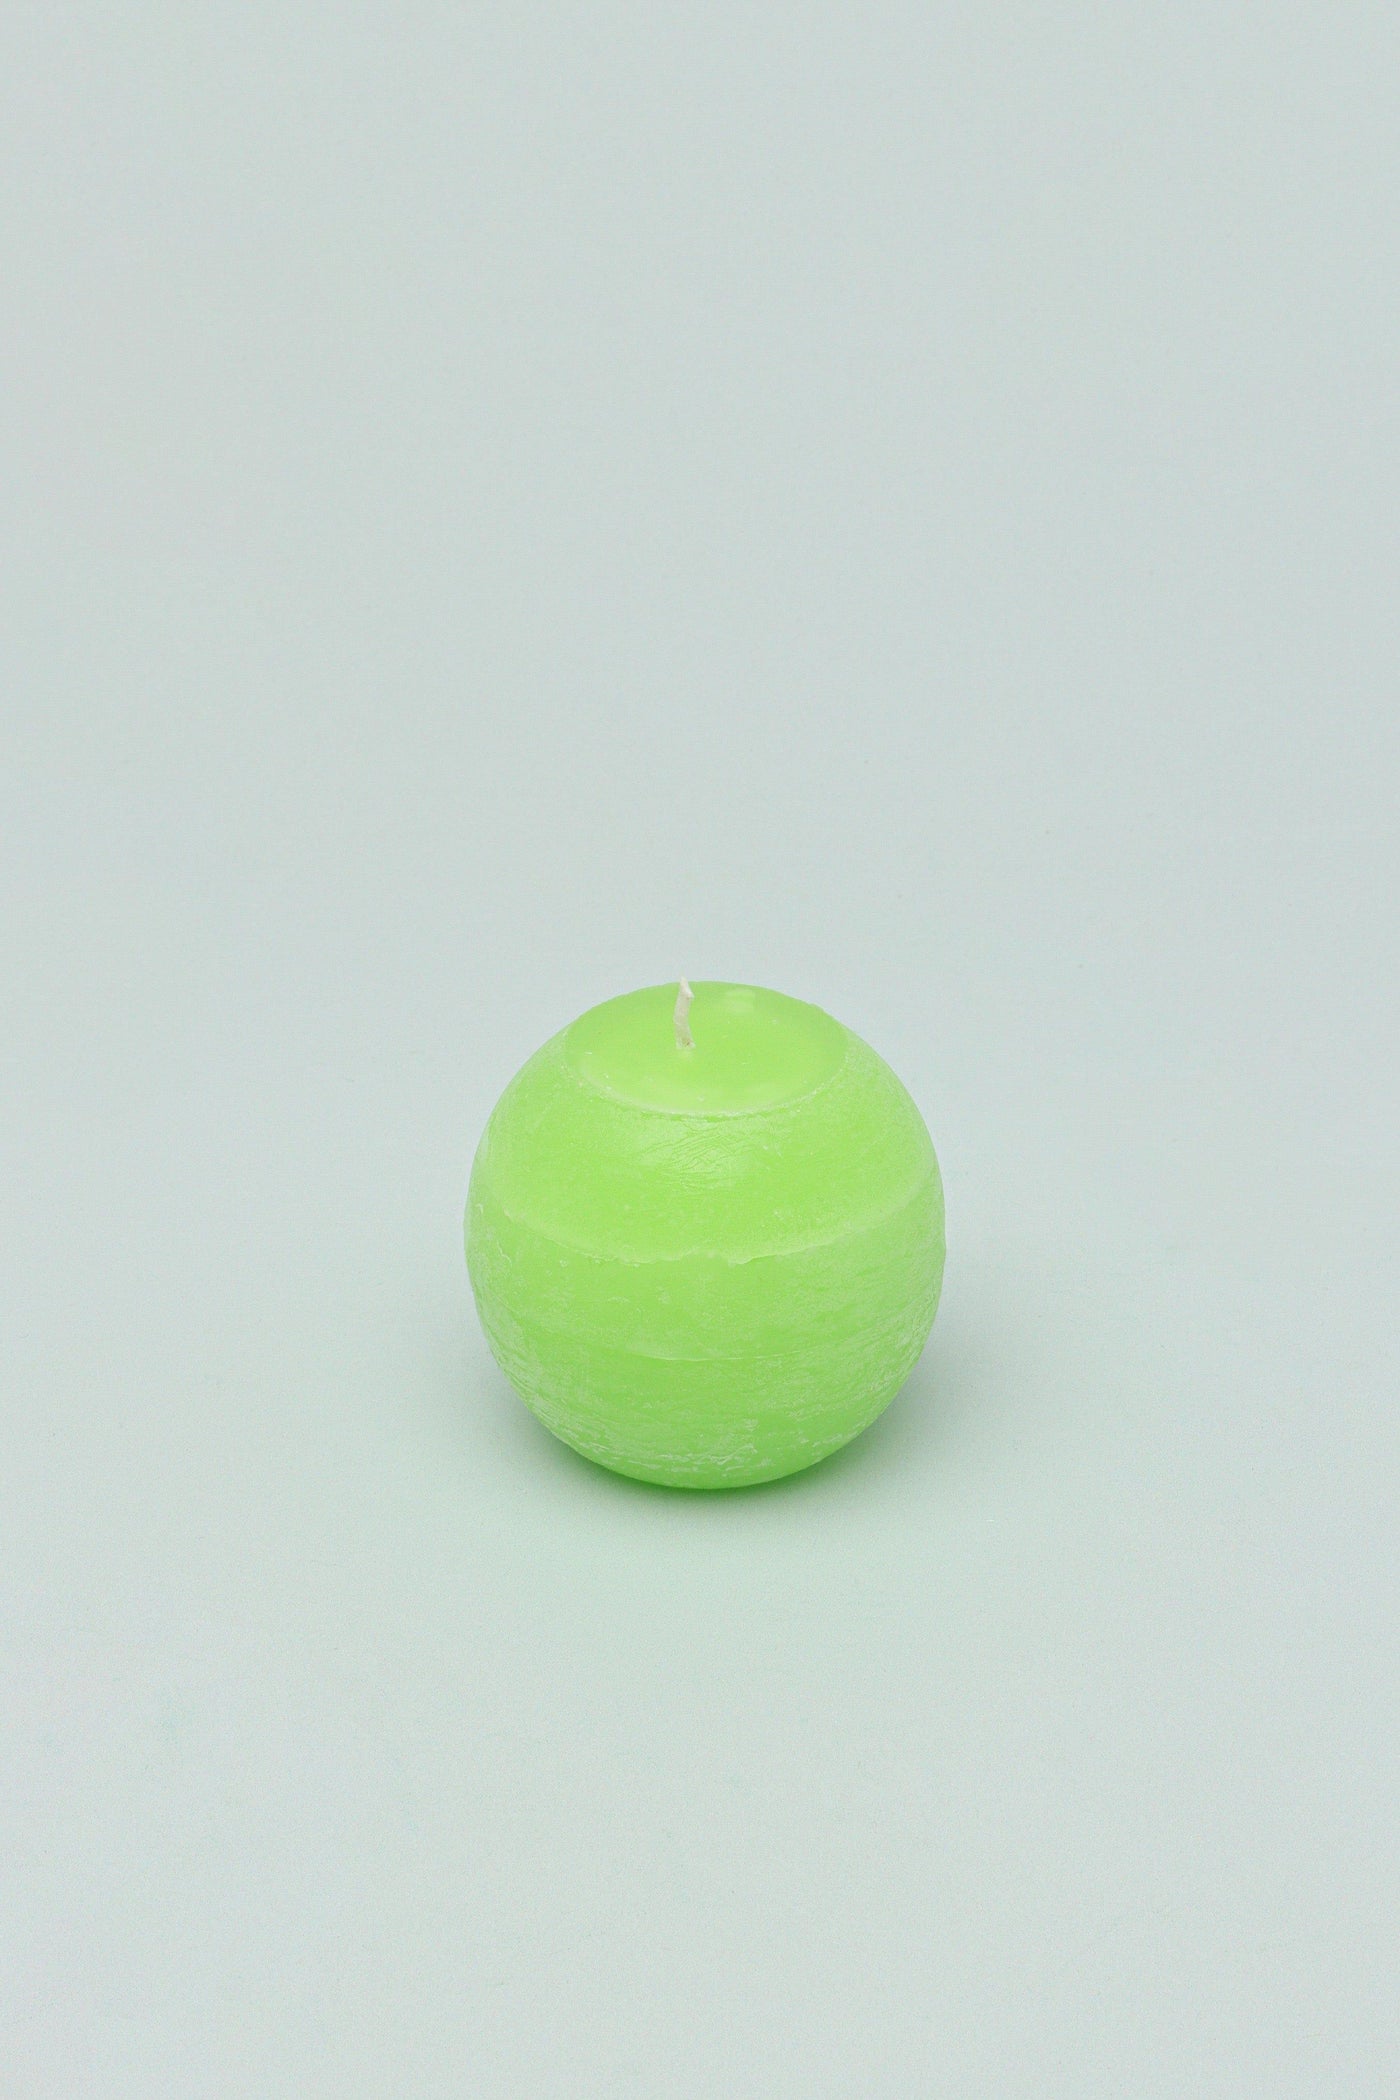 G Decor Candles & Candle Holders Small Ball Georgia Lime Green Ombre Sphere Ball Candles